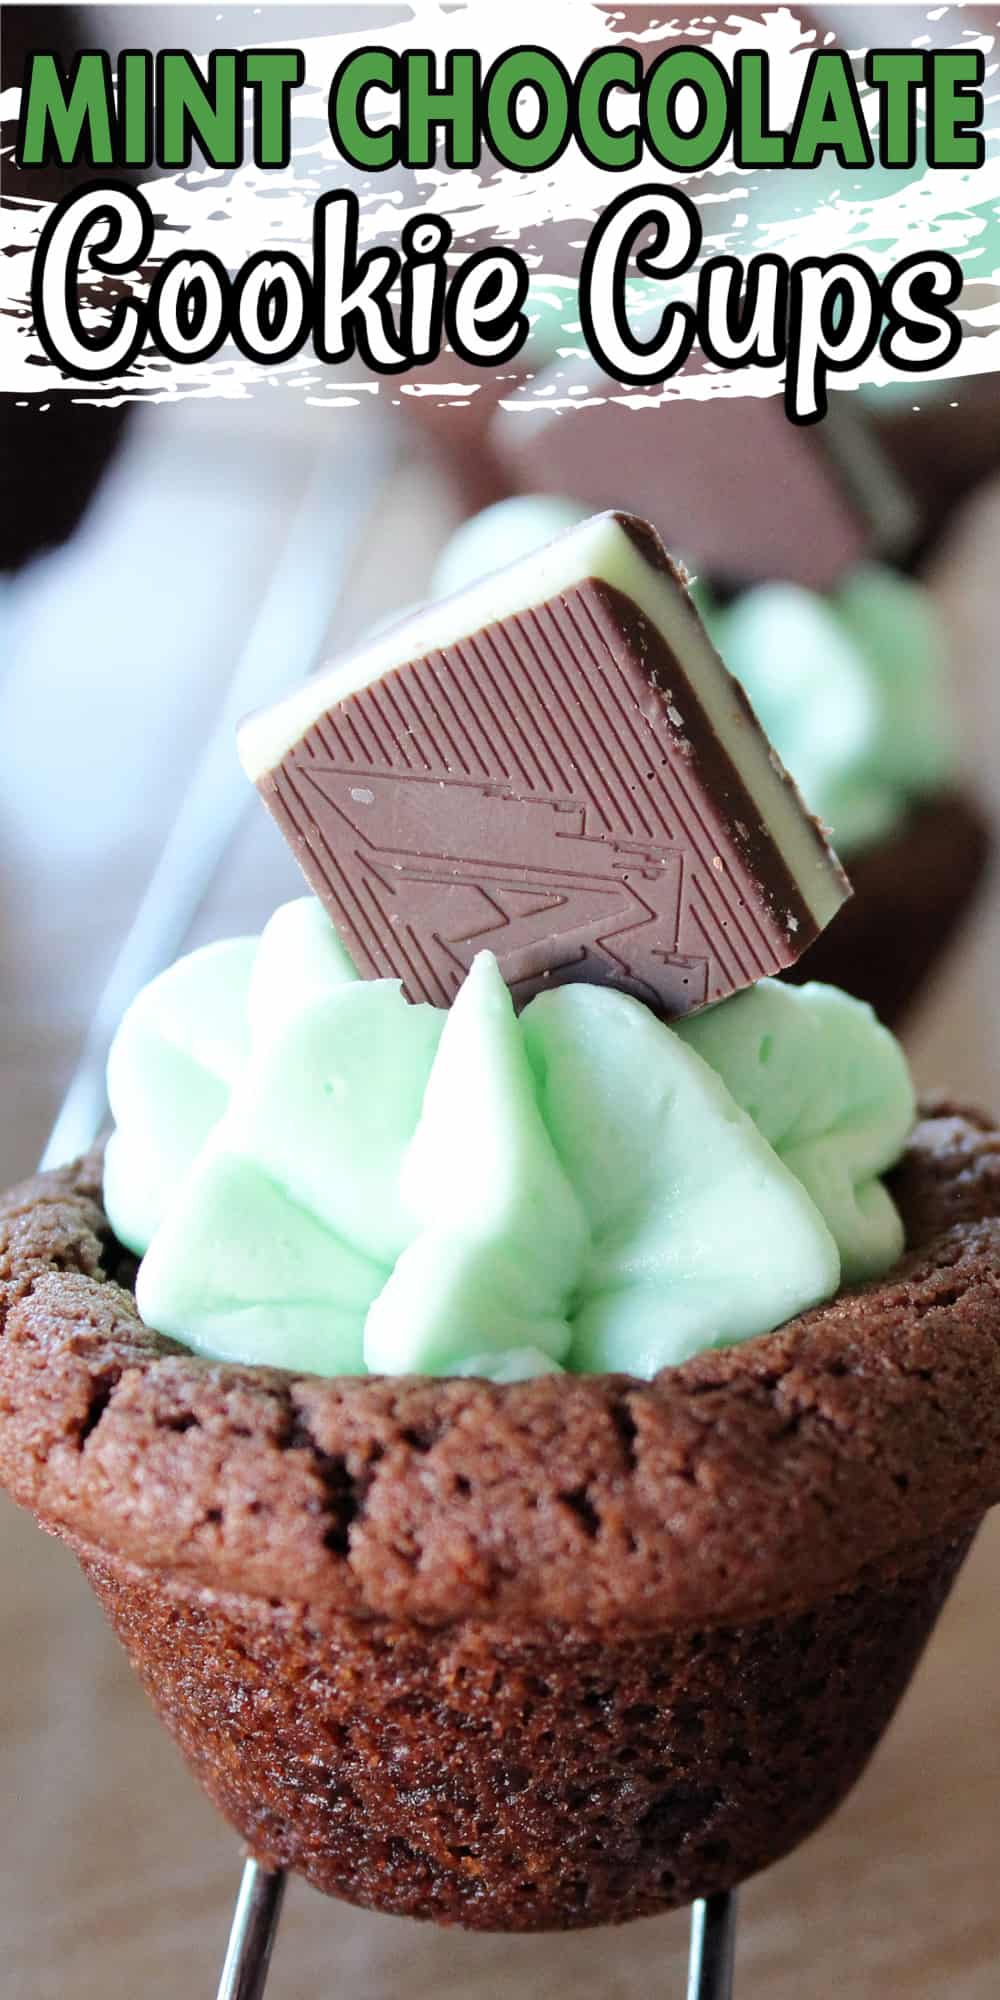 mint chocolate cookie cups with text